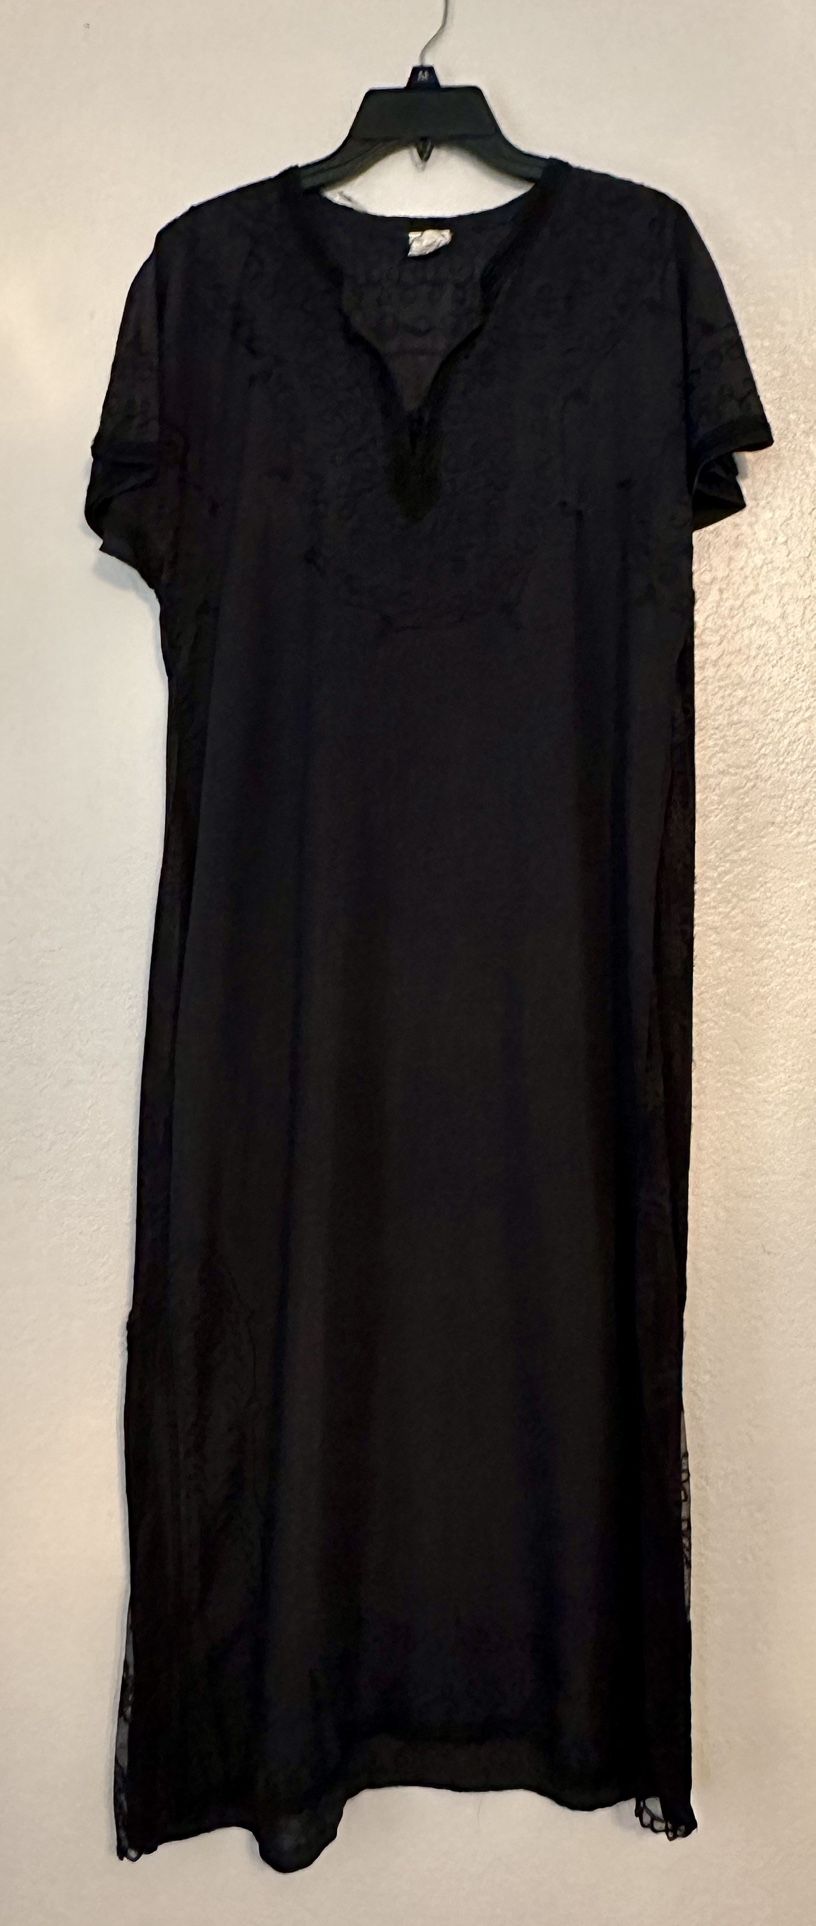 Long Black Embroidered Dress